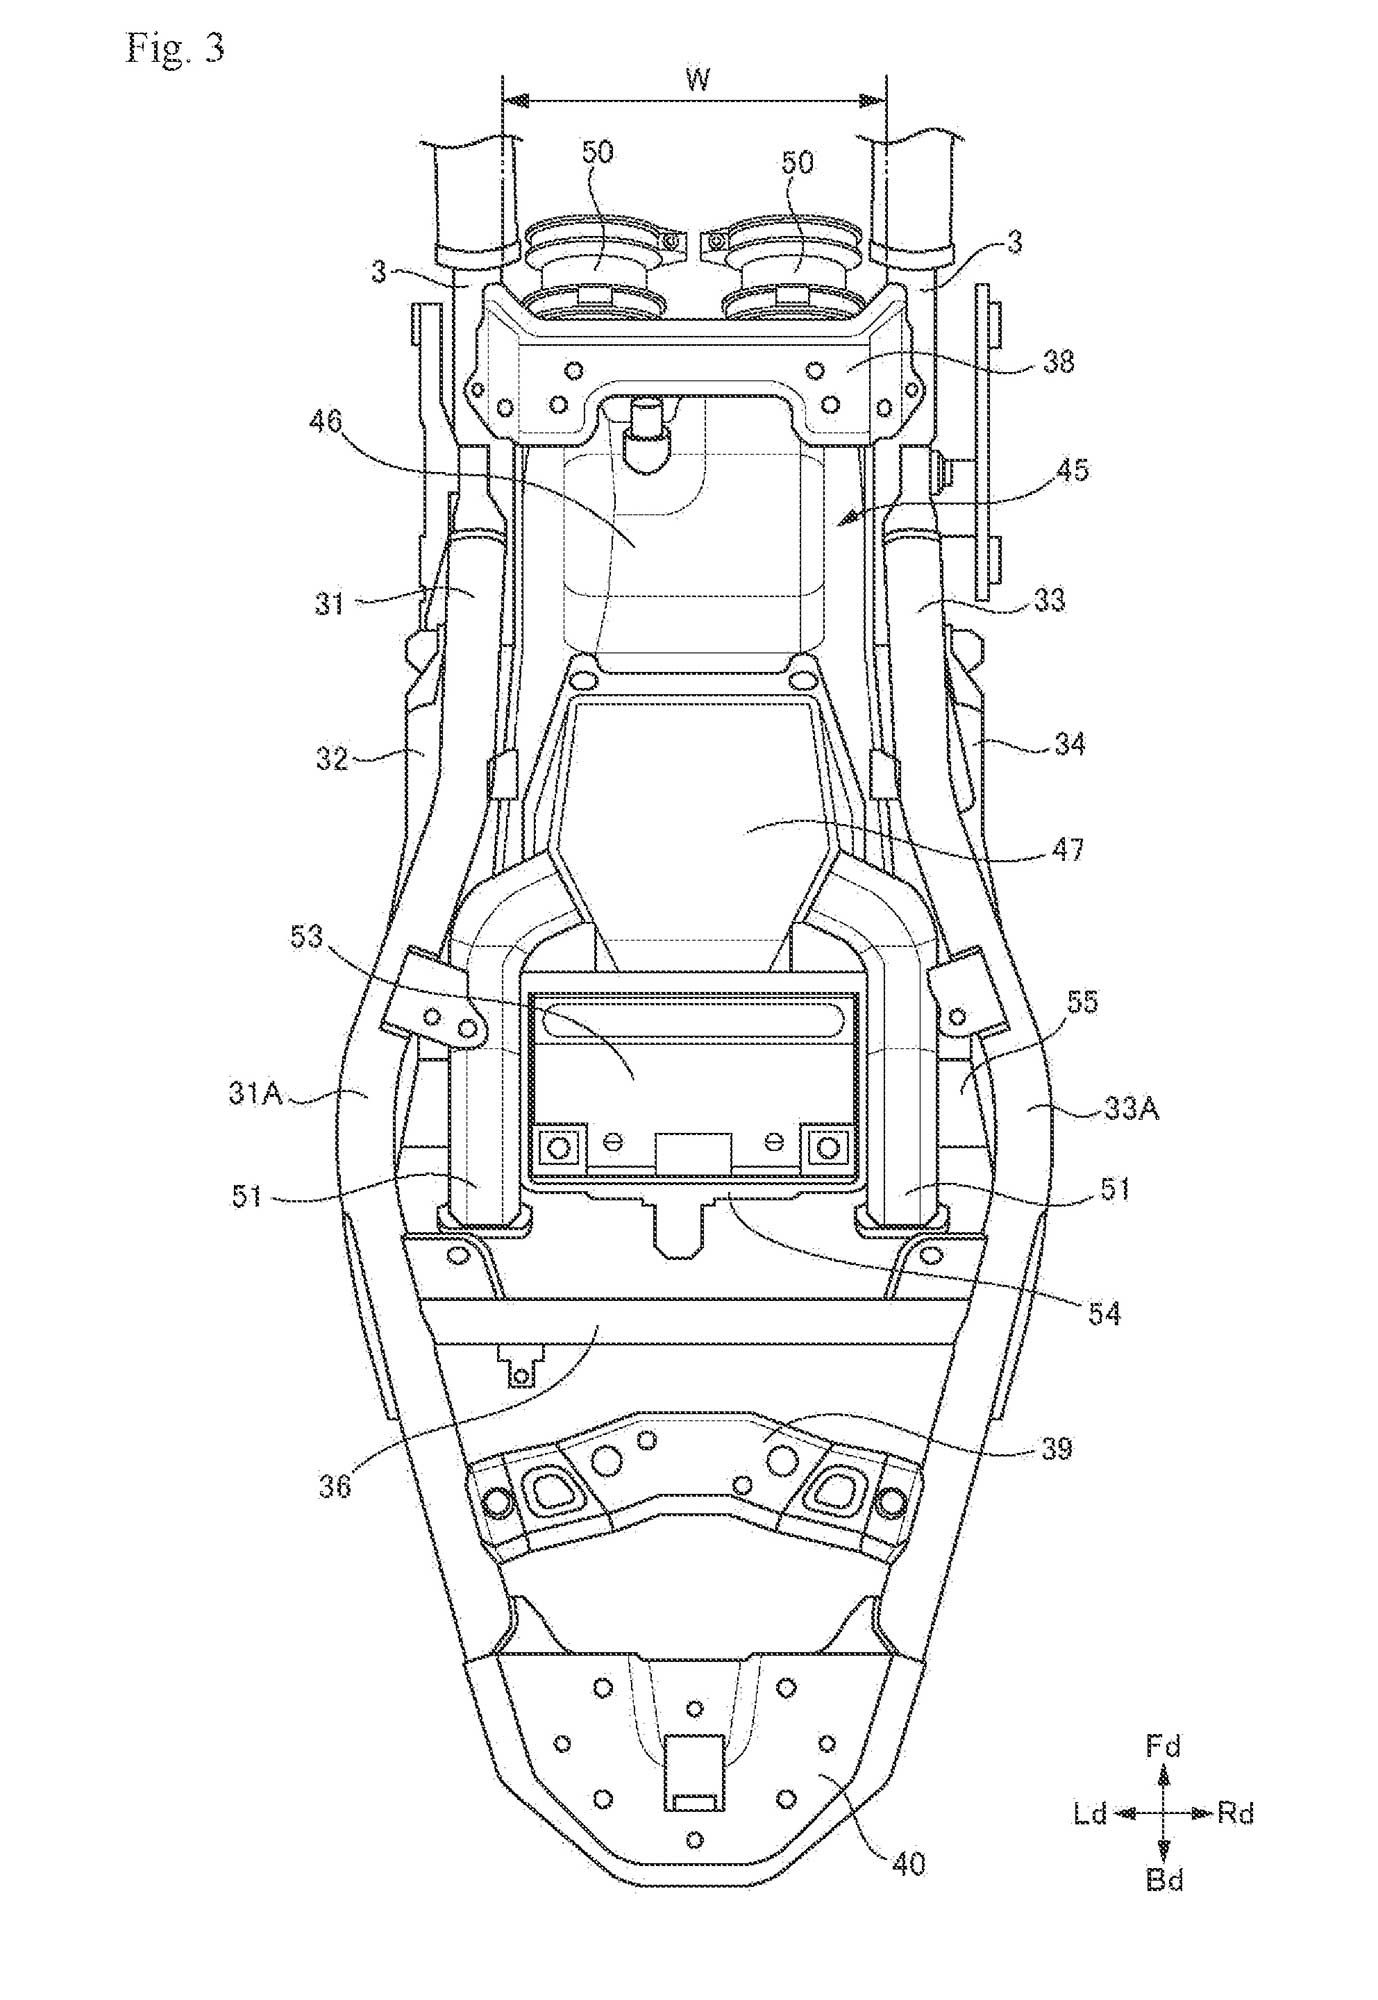 A patent image of the upcoming 700cc parallel-twin engine in a SV650-like motorcycle